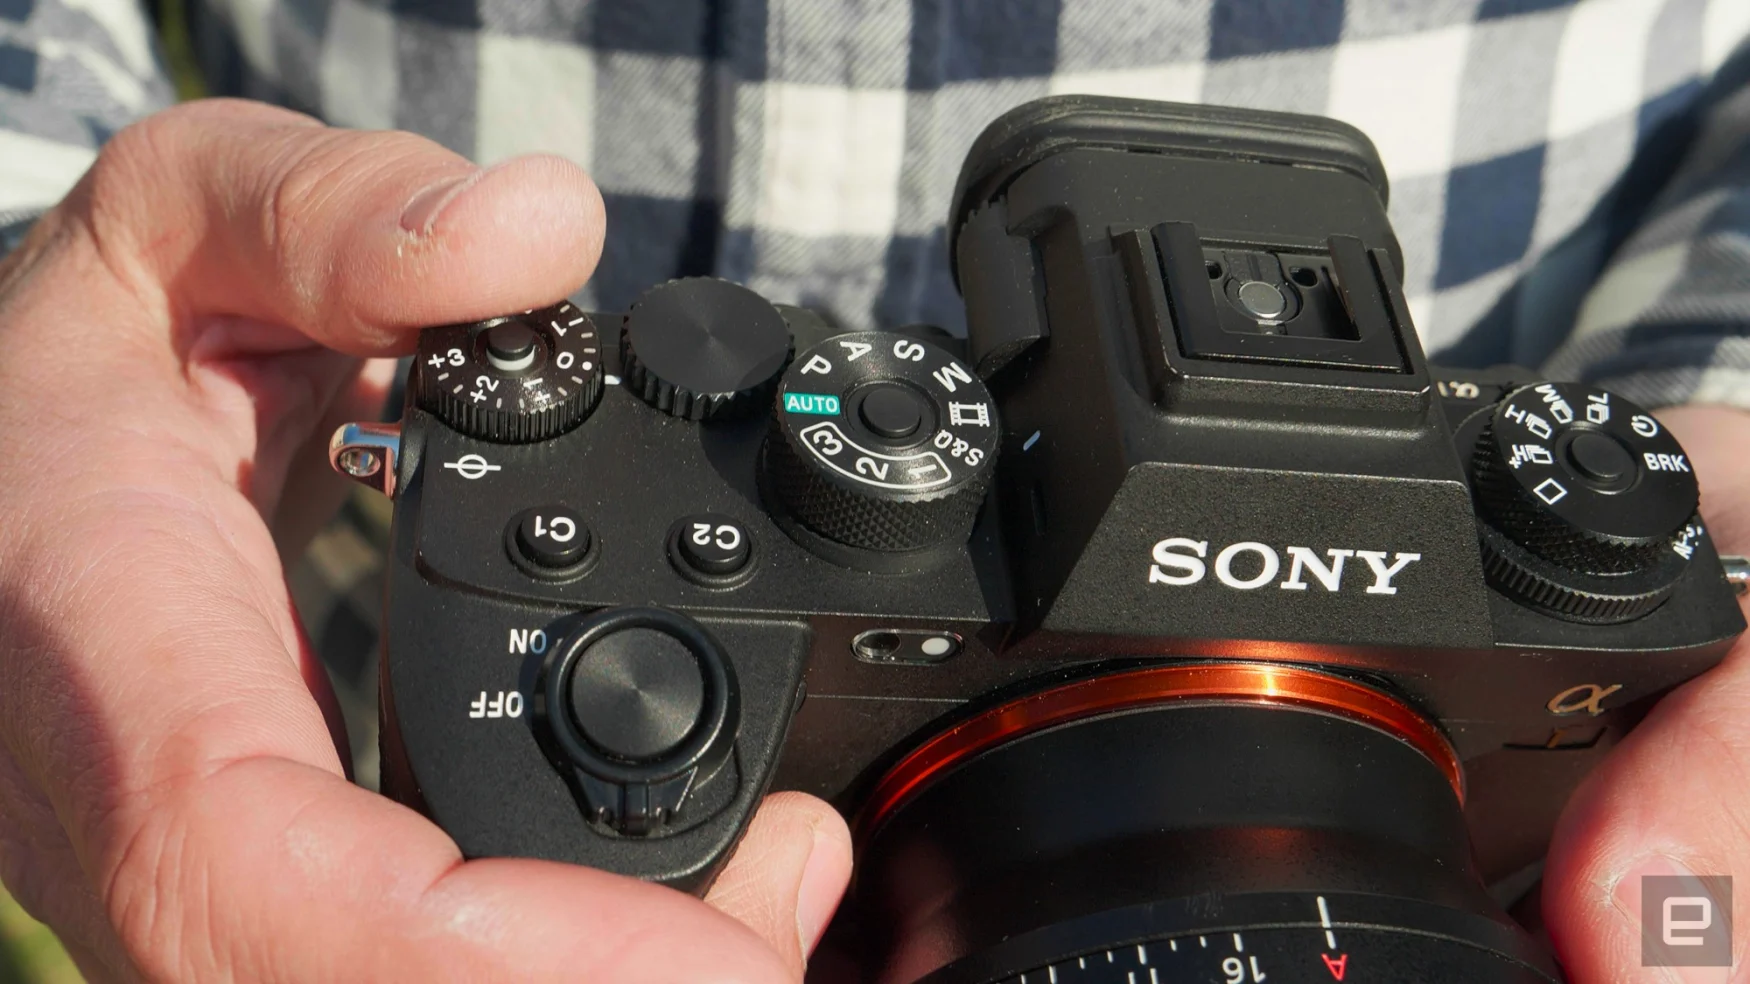 Sony A1 review: The Alpha of mirrorless cameras
